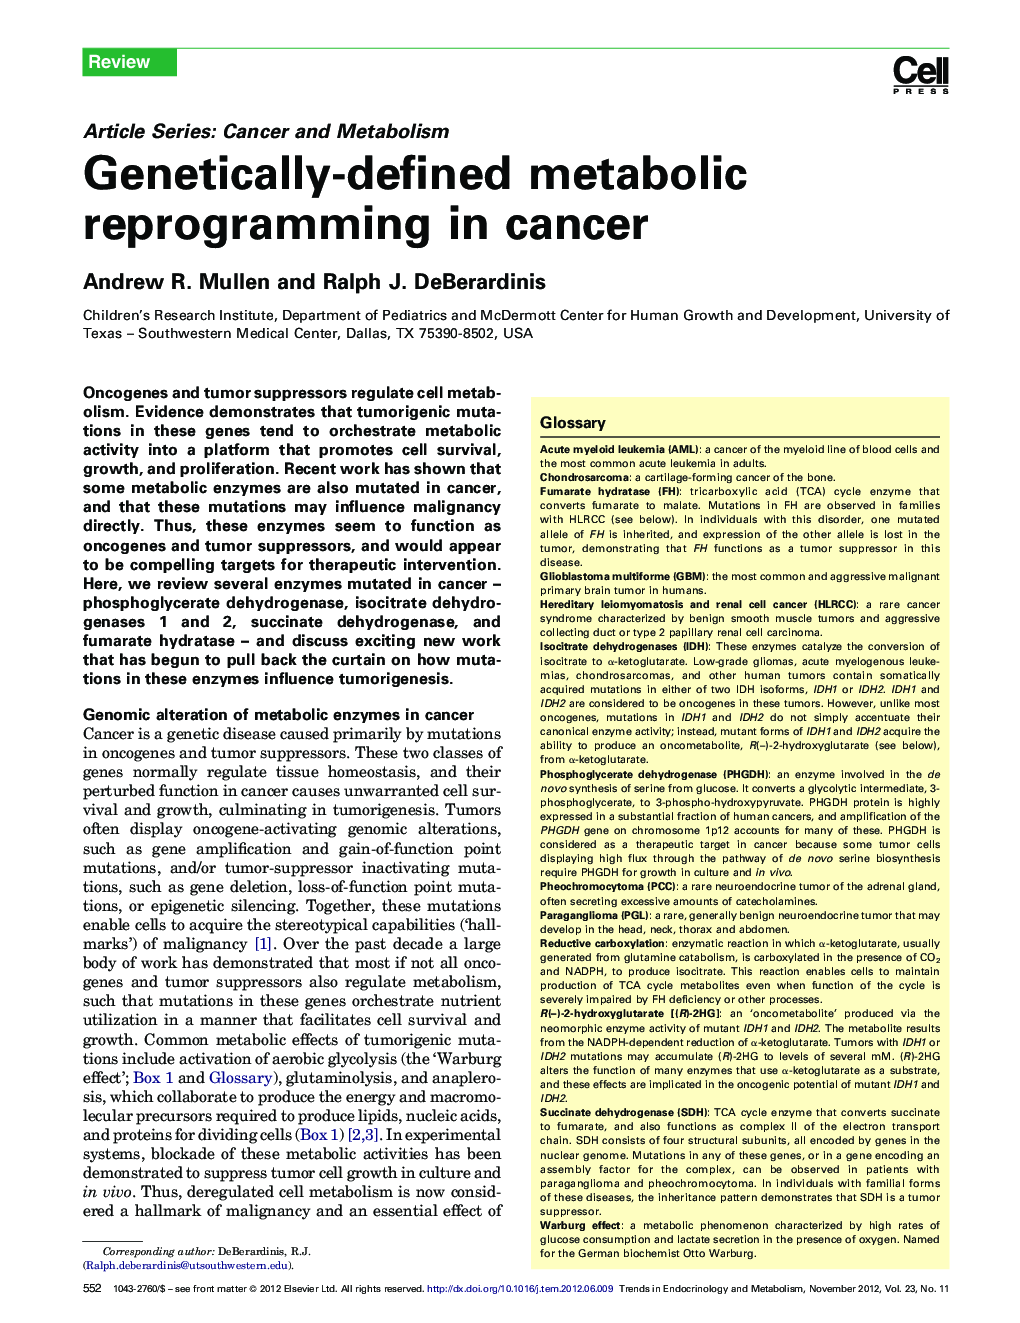 Genetically-defined metabolic reprogramming in cancer